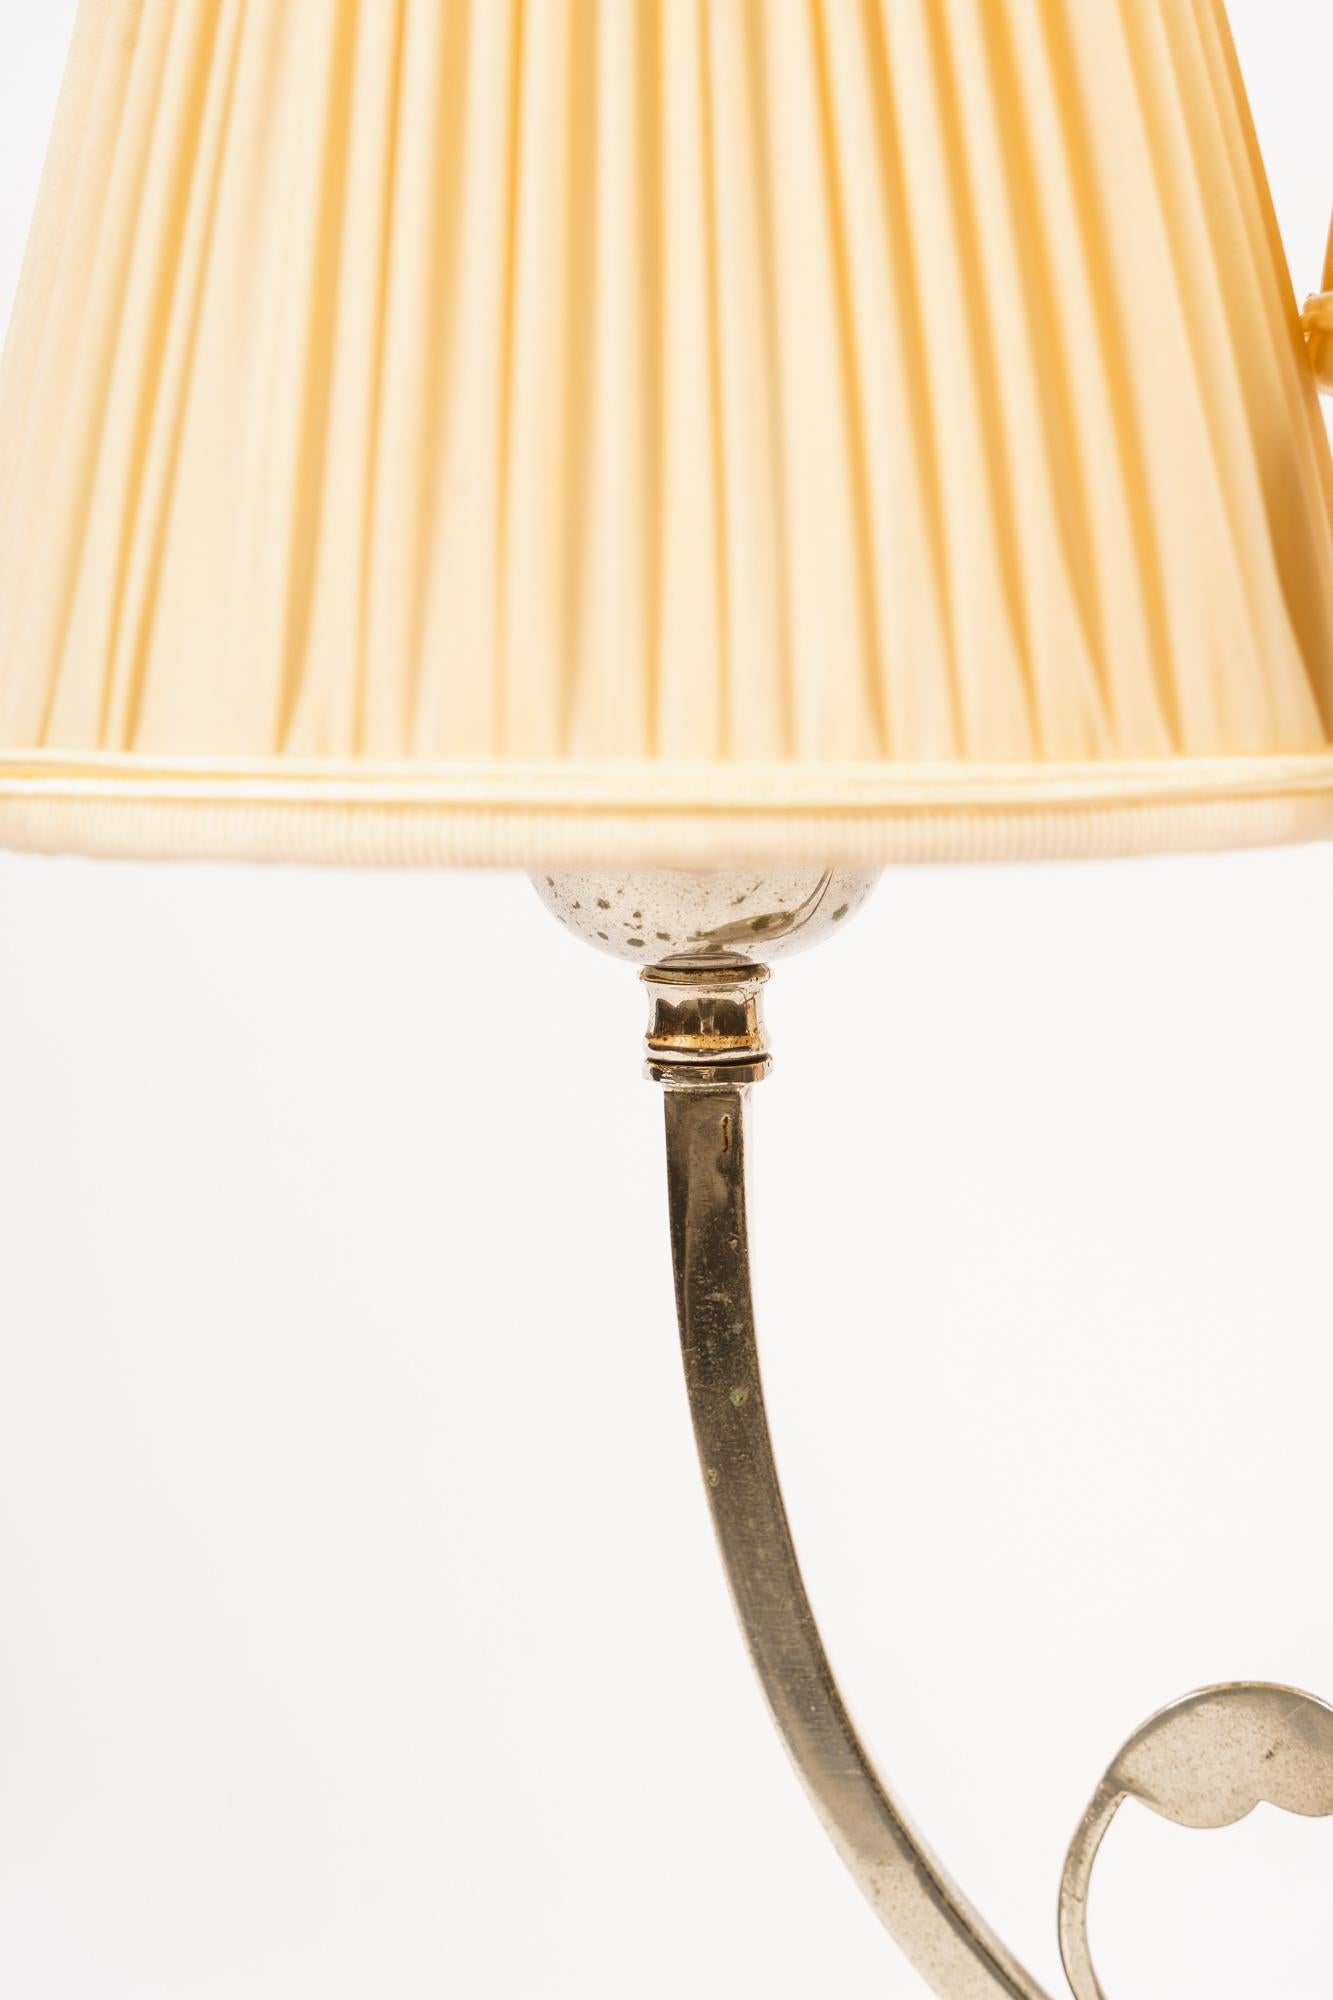 Plated Rare Art Deco Table Lamp with Fabric Shades Vienna Around 1920s For Sale